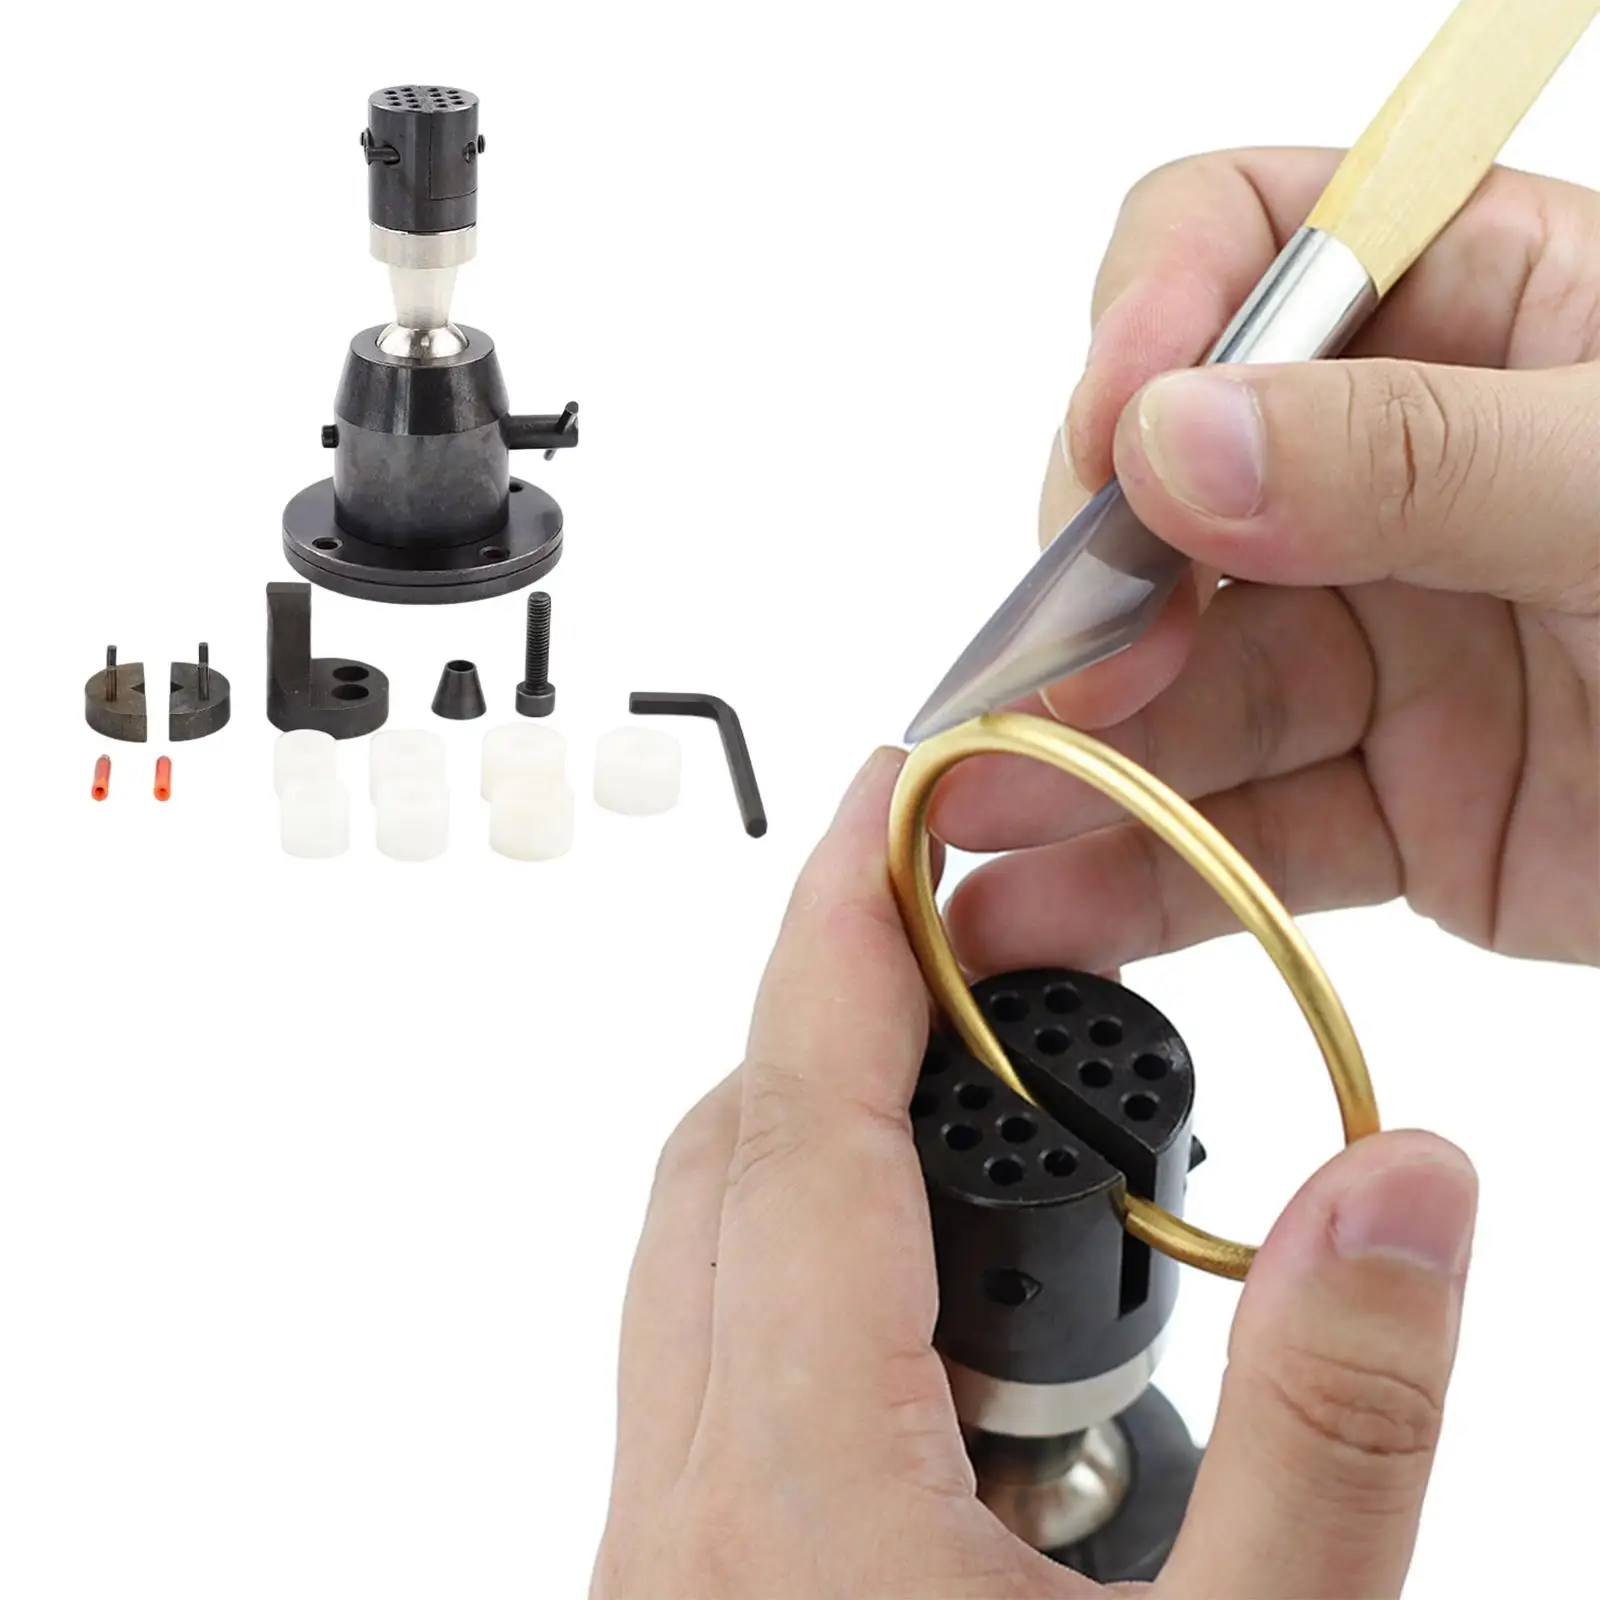 Jewelry Inlays Tool Ball Vise Set for Engravers and Craftsmen Smooth Self Centering System